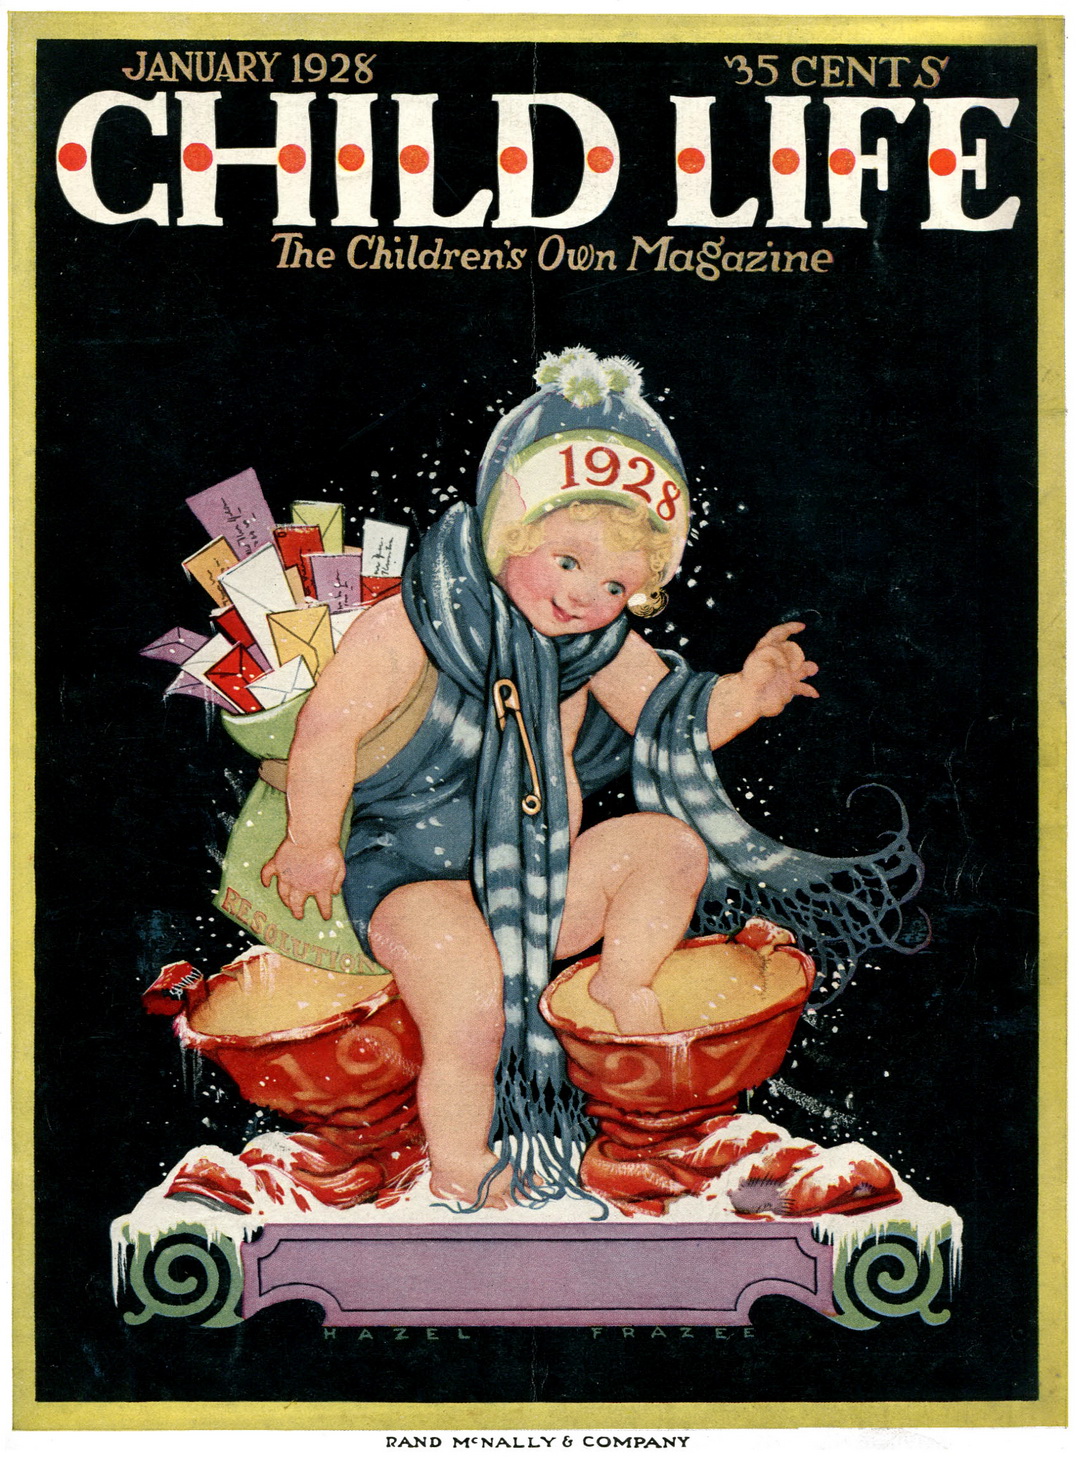 Child Life #1 - Cover (Jan 1928)